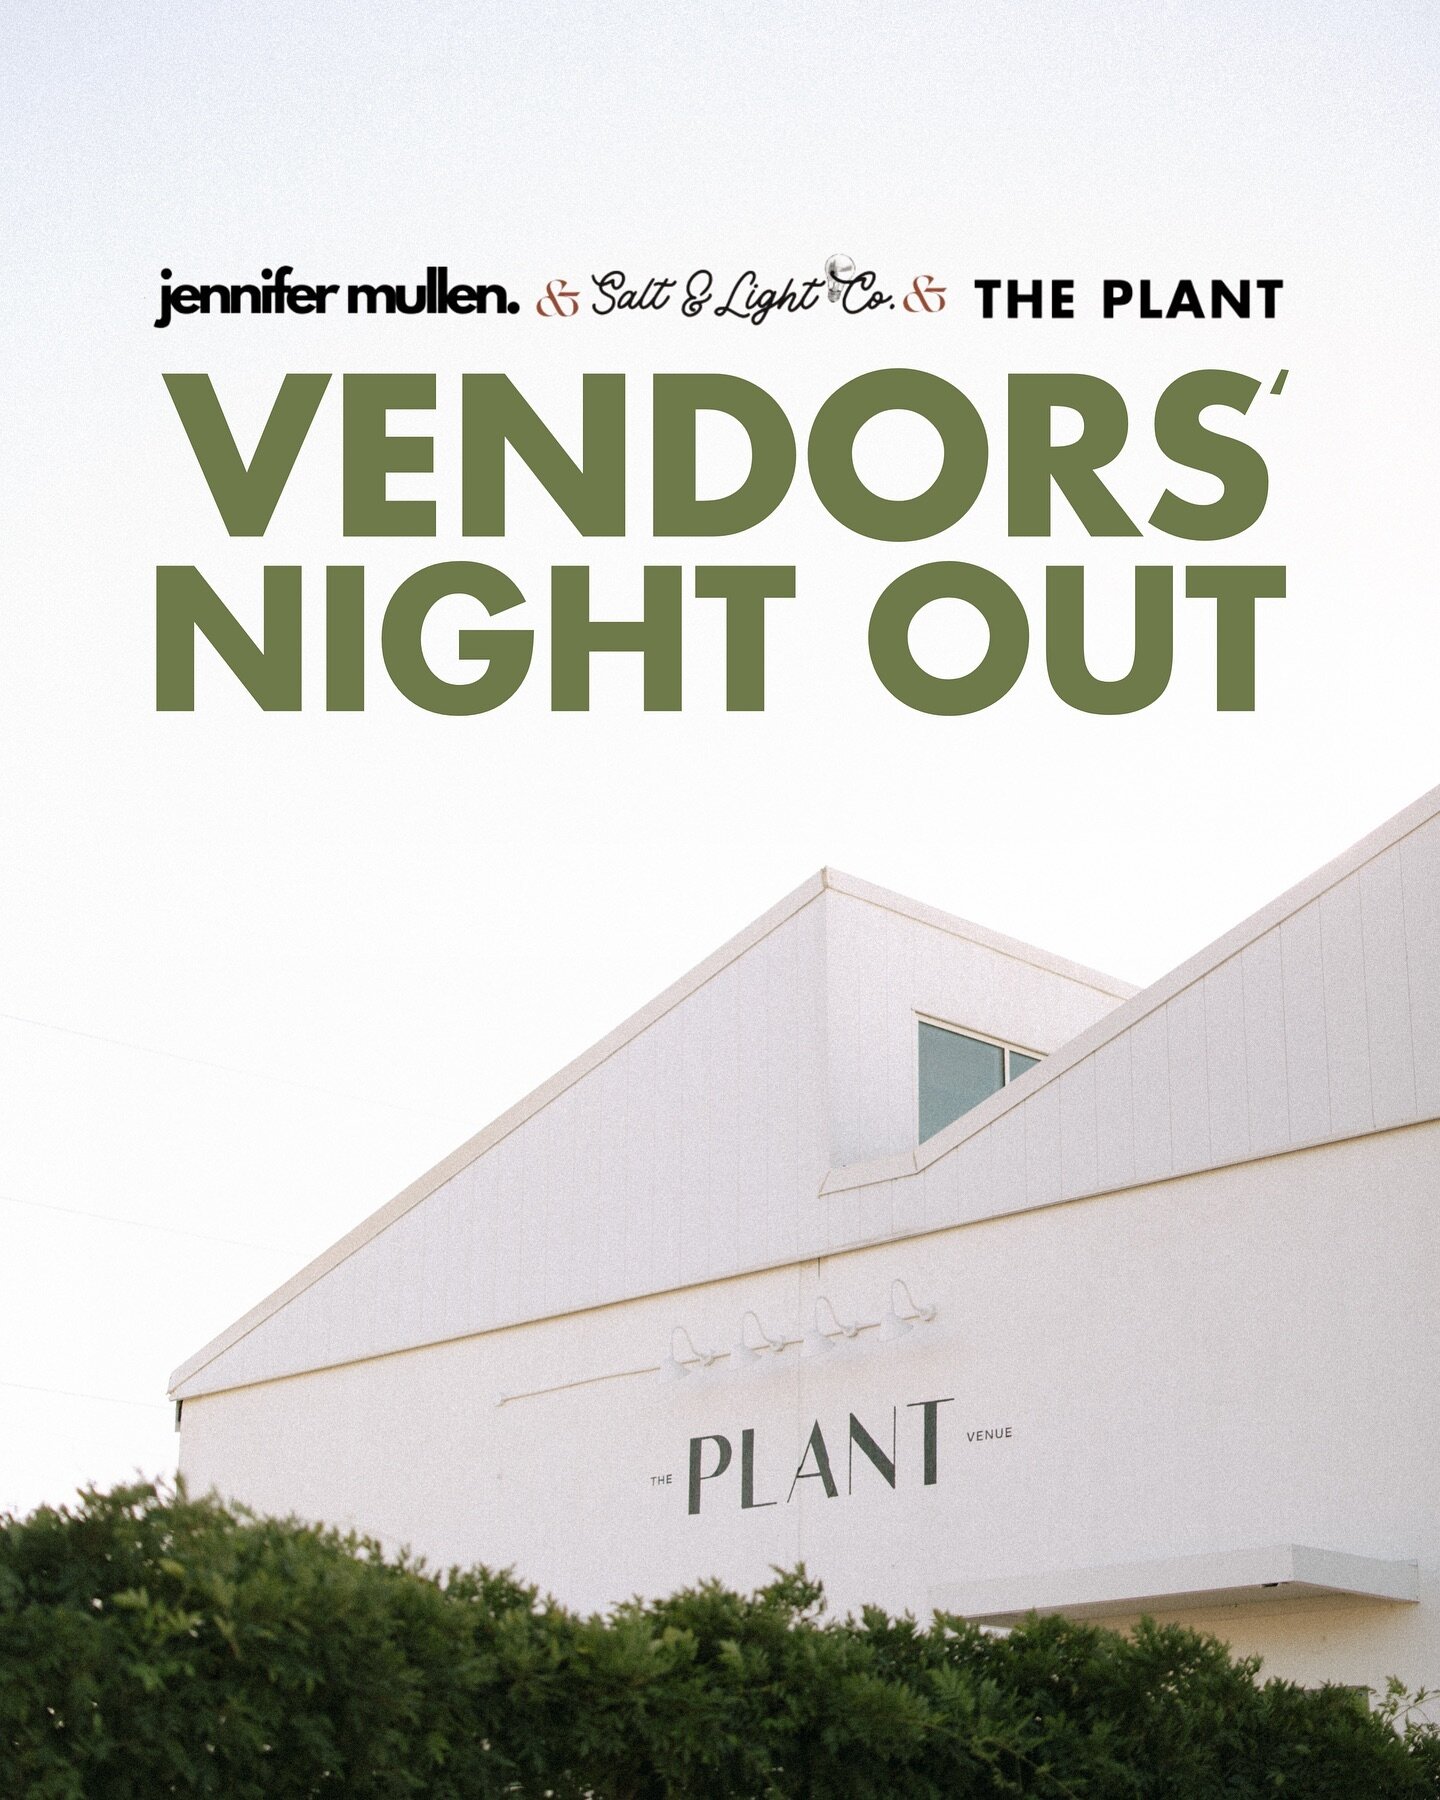 Vendors, we will see you in one week to #PartyAtThePlant 🪩🌿 Gather your business cards because we want to connect with you next Thursday at Vendors&rsquo; Night Out (for vendors only)! 💬

Huge thanks to @jmeventsanddesigns and @_saltandlightco for